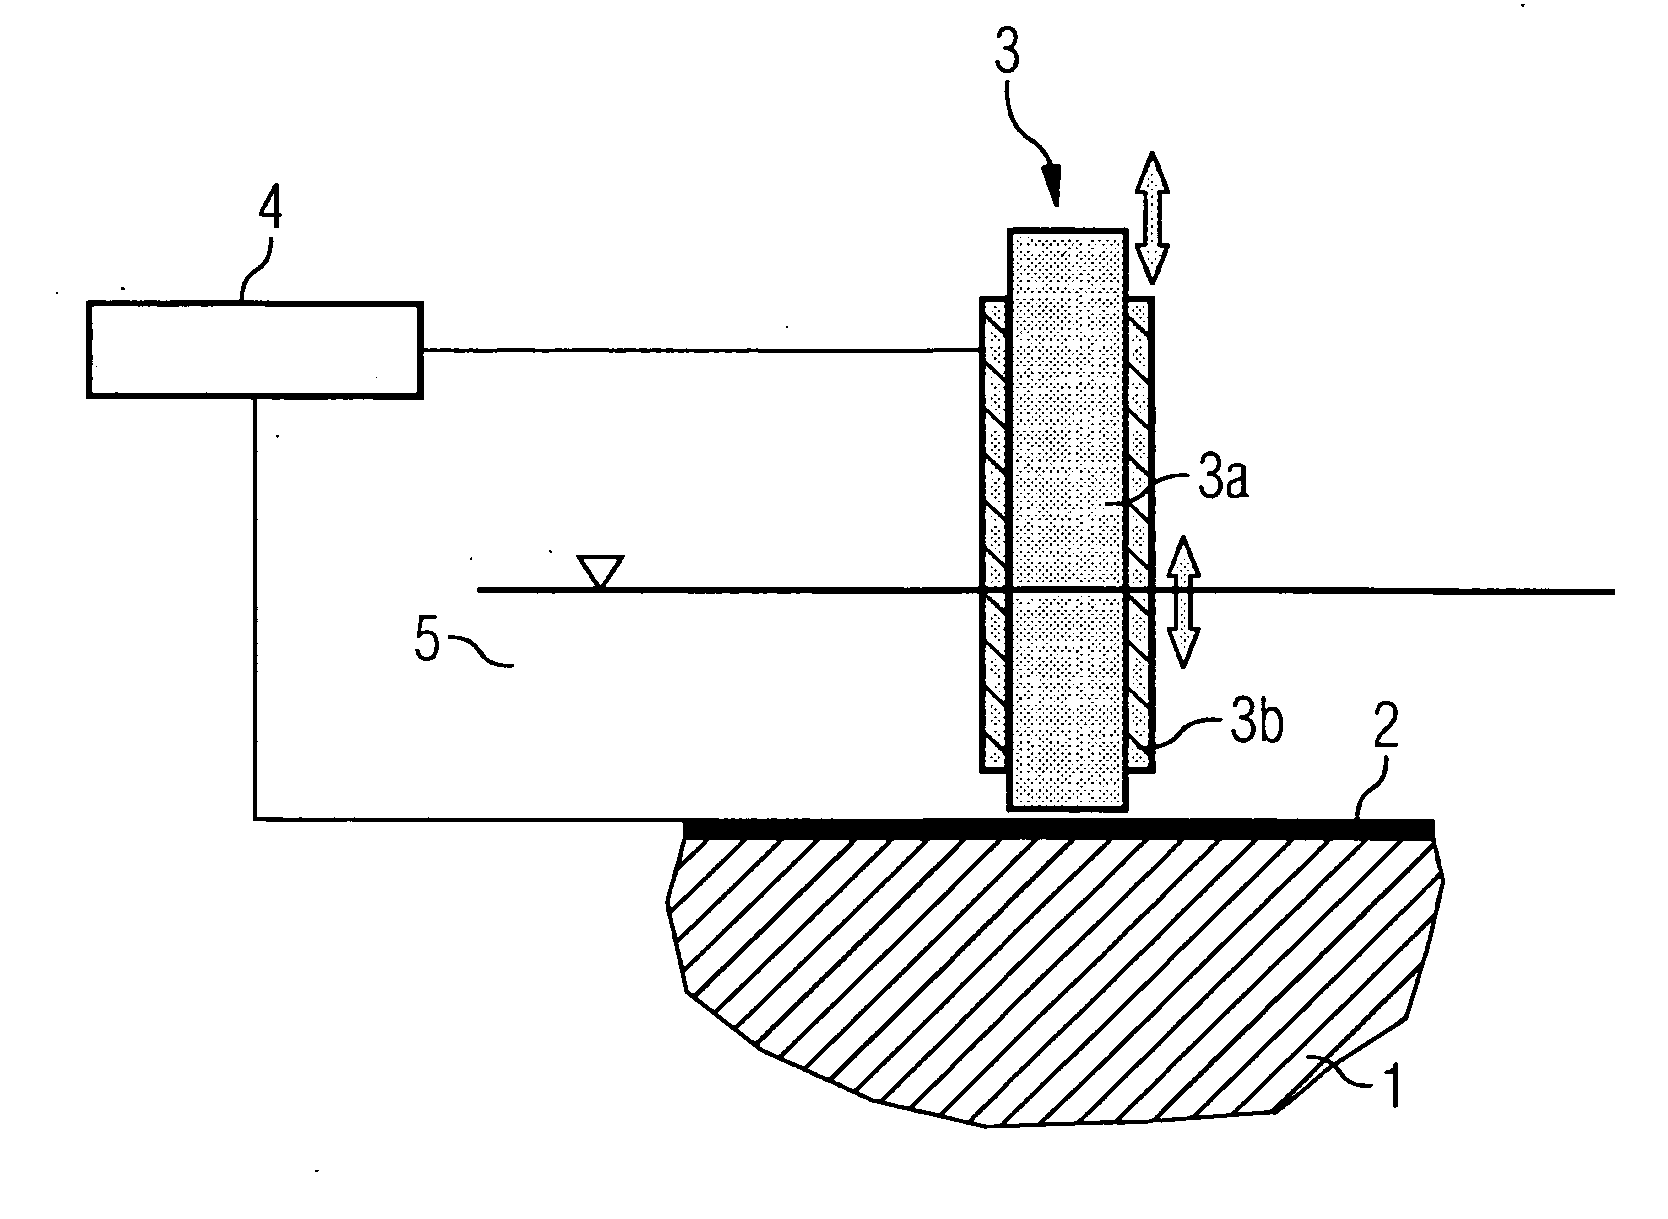 Electrode Arrangement for Electrical Discharge Machining on an Electrically Non-Conductive Material